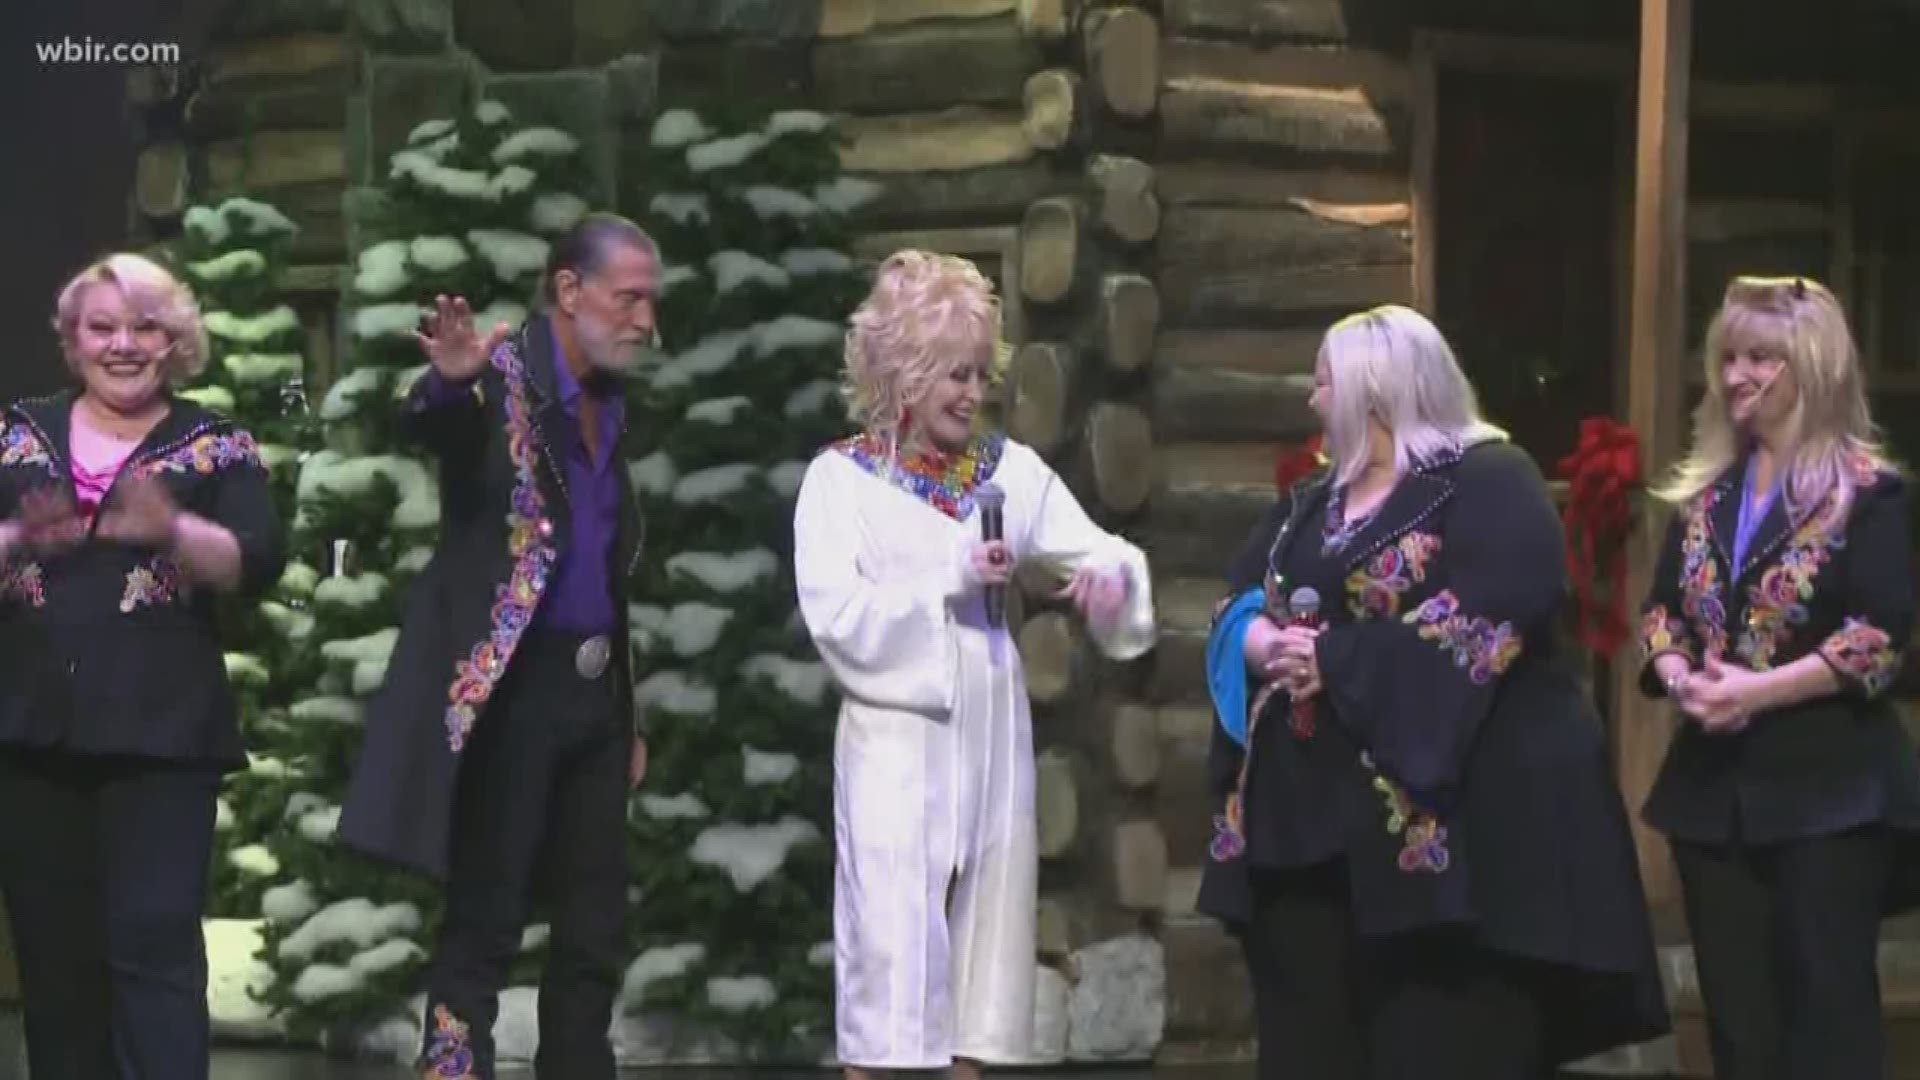 Dollywood has added more lights and a new attraction for Smoky Mountain Christmas. Glacier Ridge includes a 50 foot tall animated tree and a synchronized light show. Smoky Mountain Christmas opens Nov.10. For more information visit dollywood.com
Nov. 8, 2